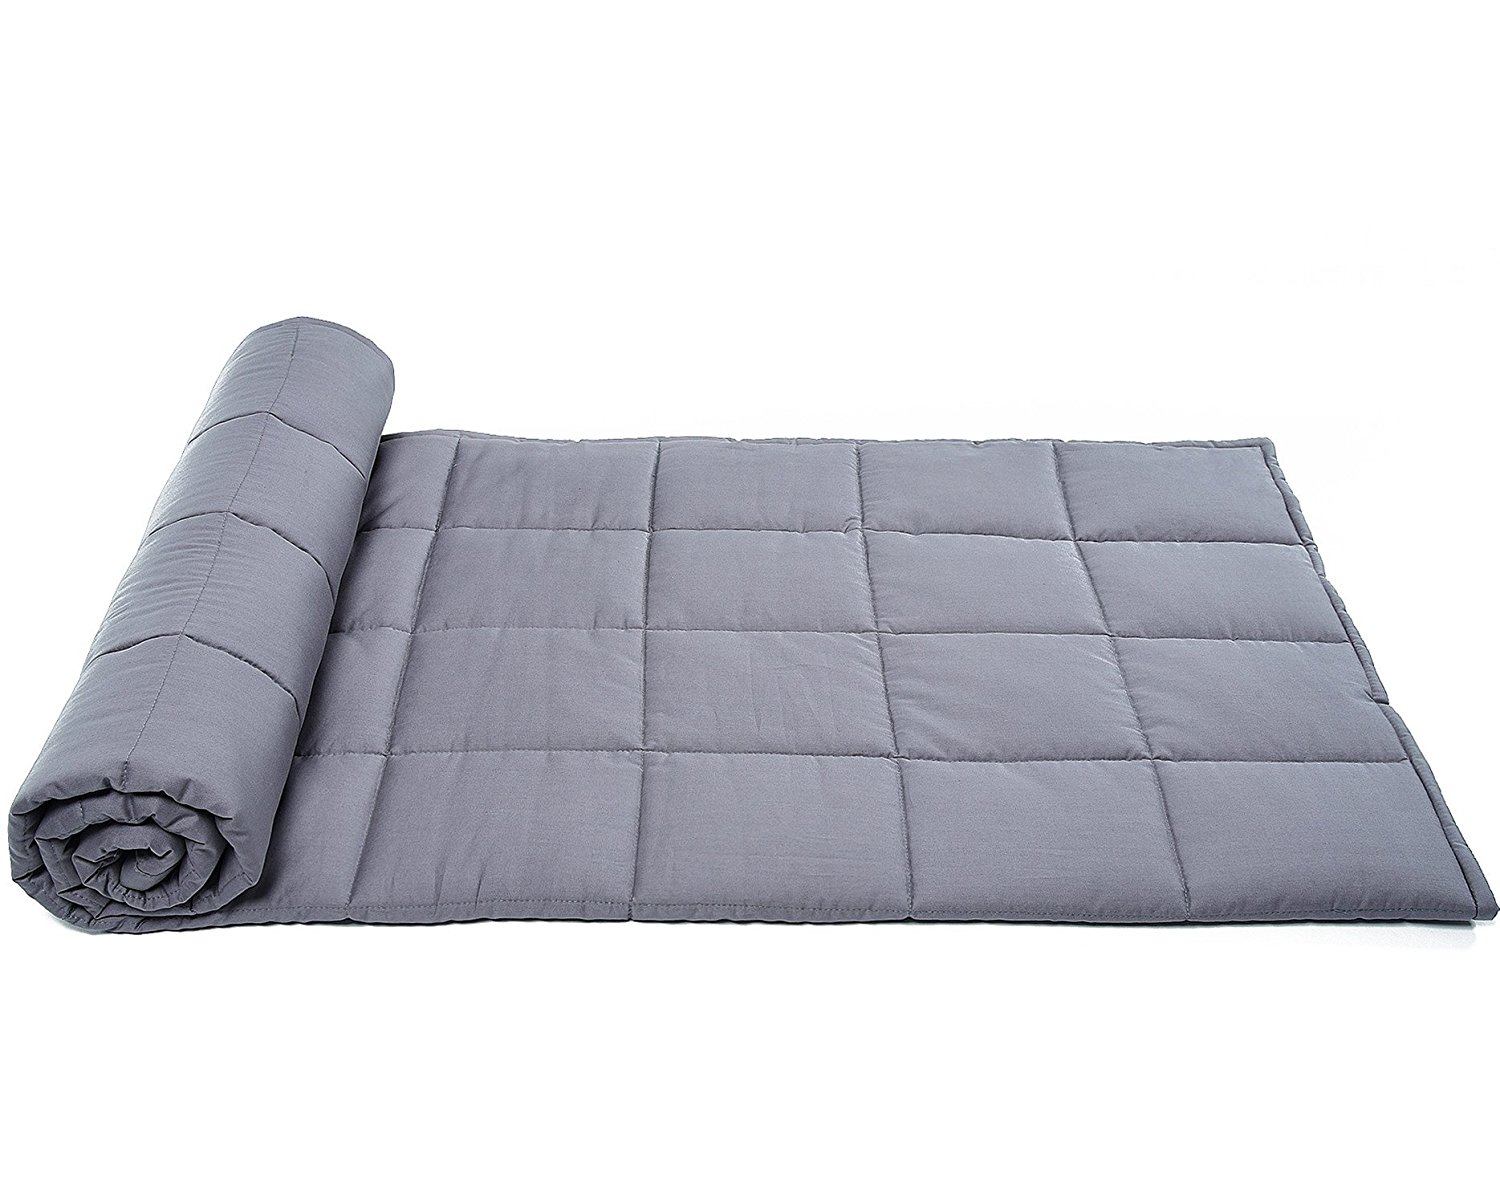 Cotton Sencery Weighted Blanket